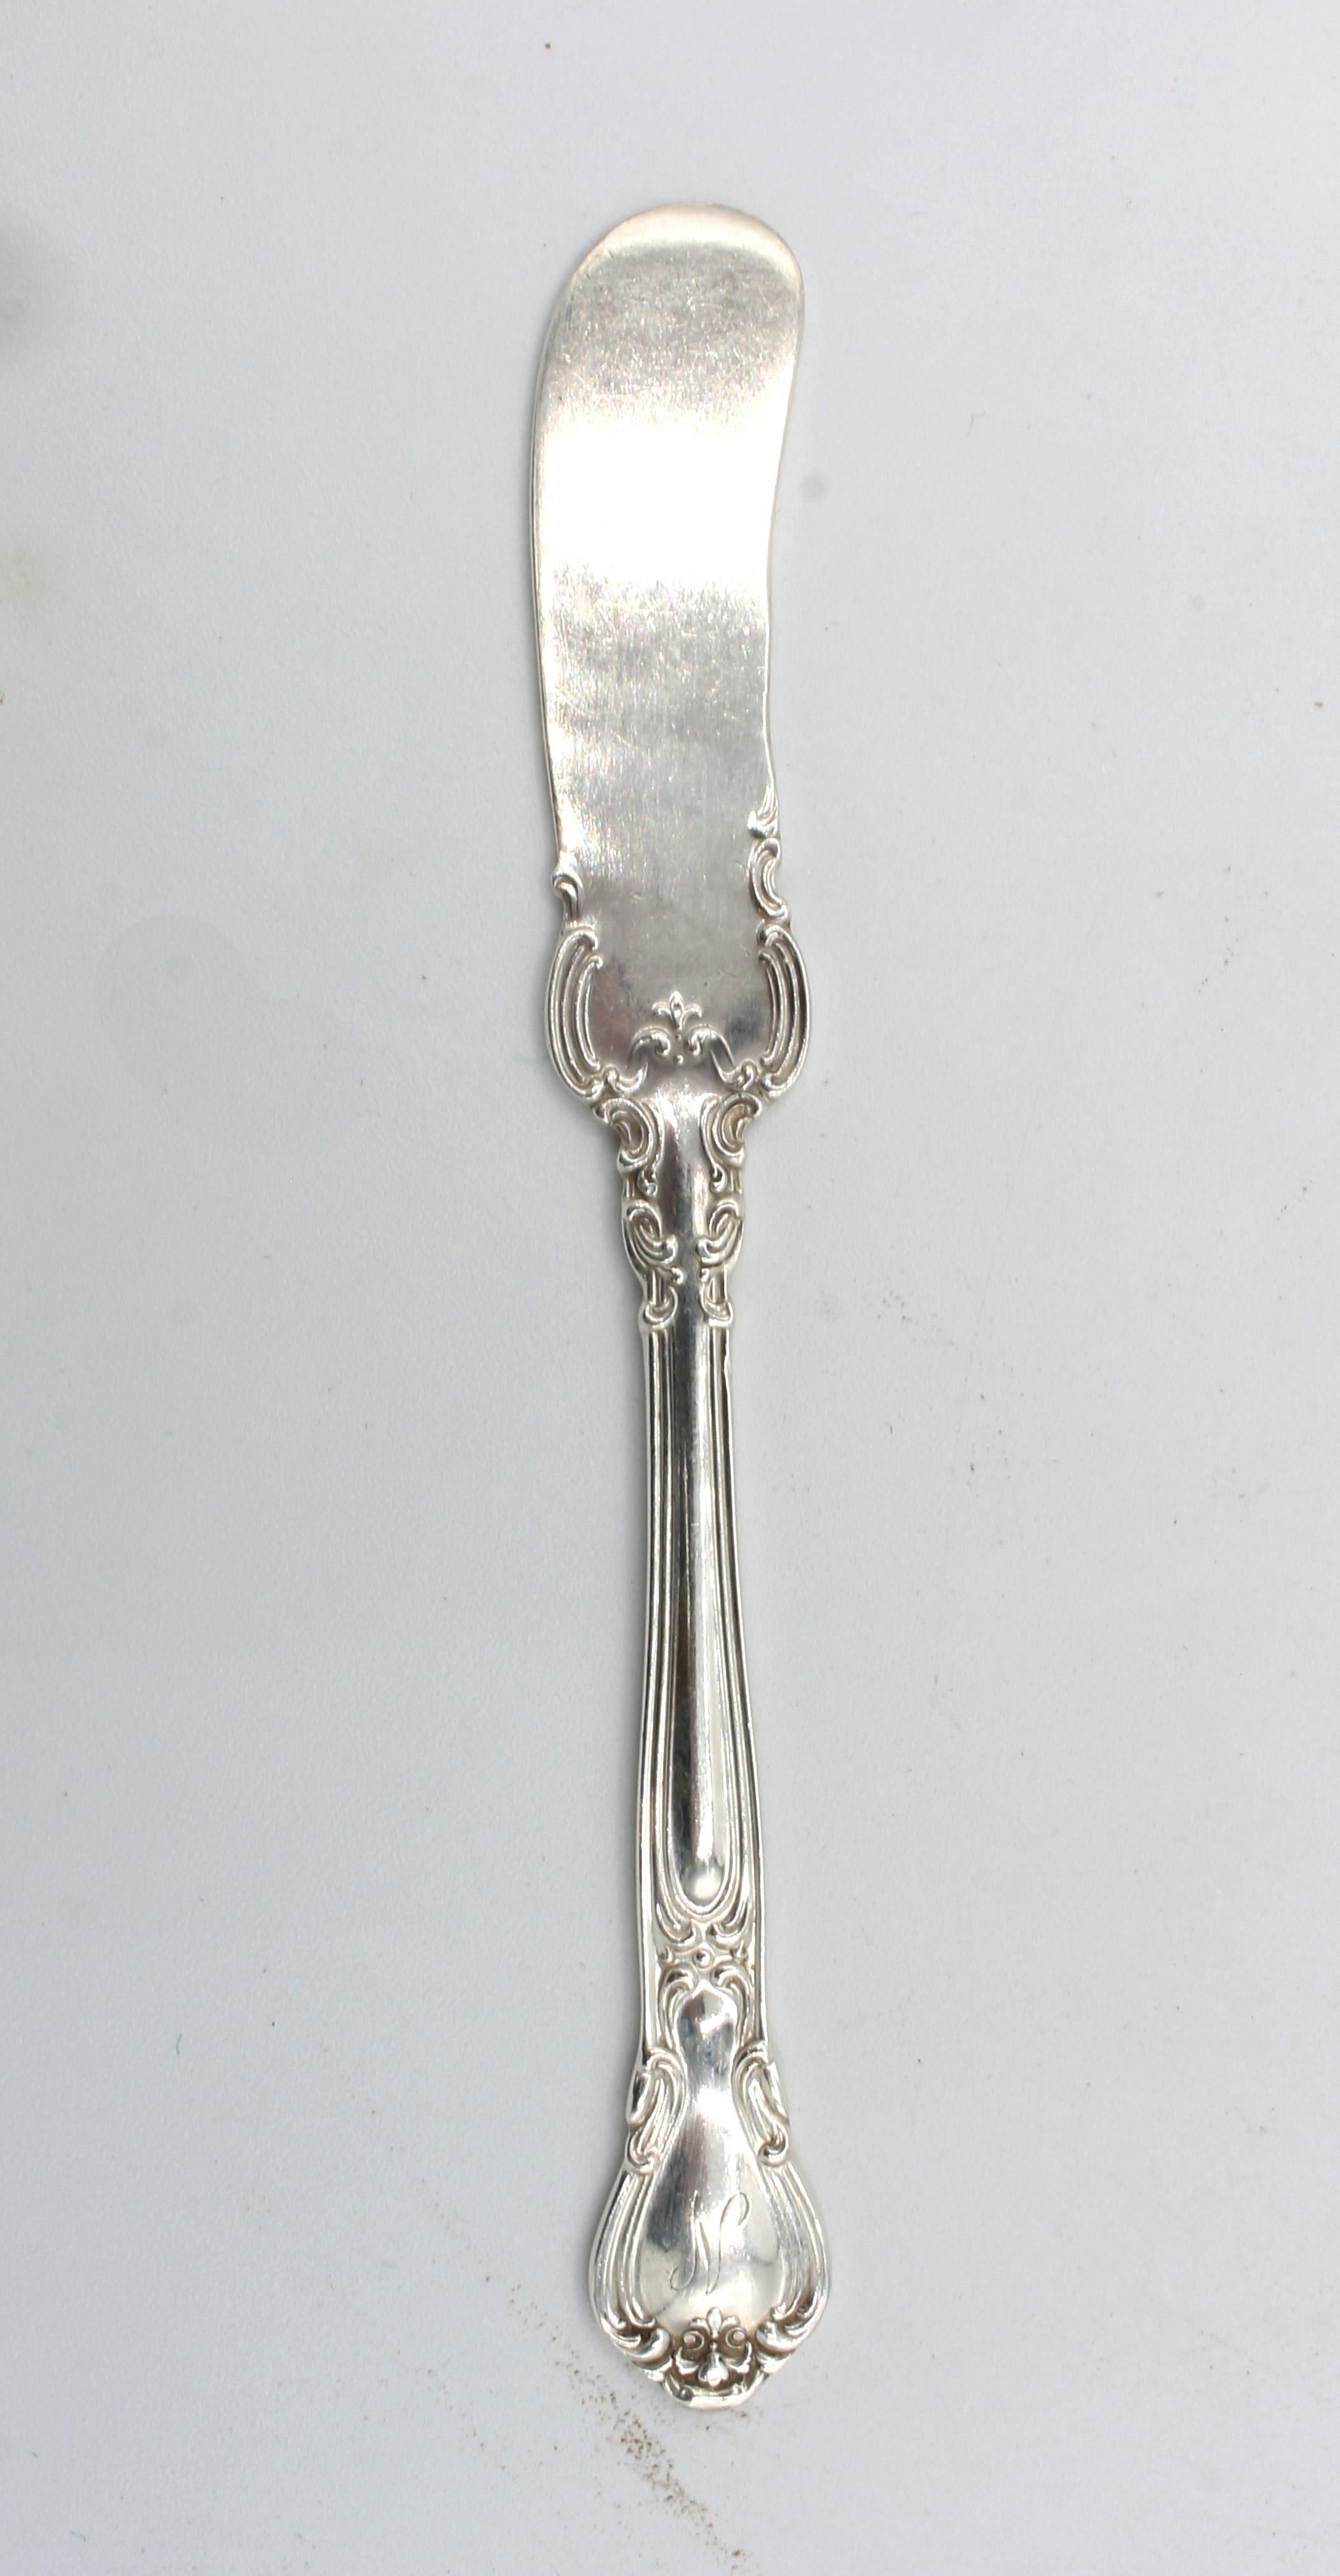 Set of 10 Chantilly pattern by Gorham sterling silver butter spreaders, early-mid 20th century. 1895 design. Flat handle solid sterling silver. Assembled - 5 with monograms & mixed dates of production. 7.75 troy oz.
5 7/8